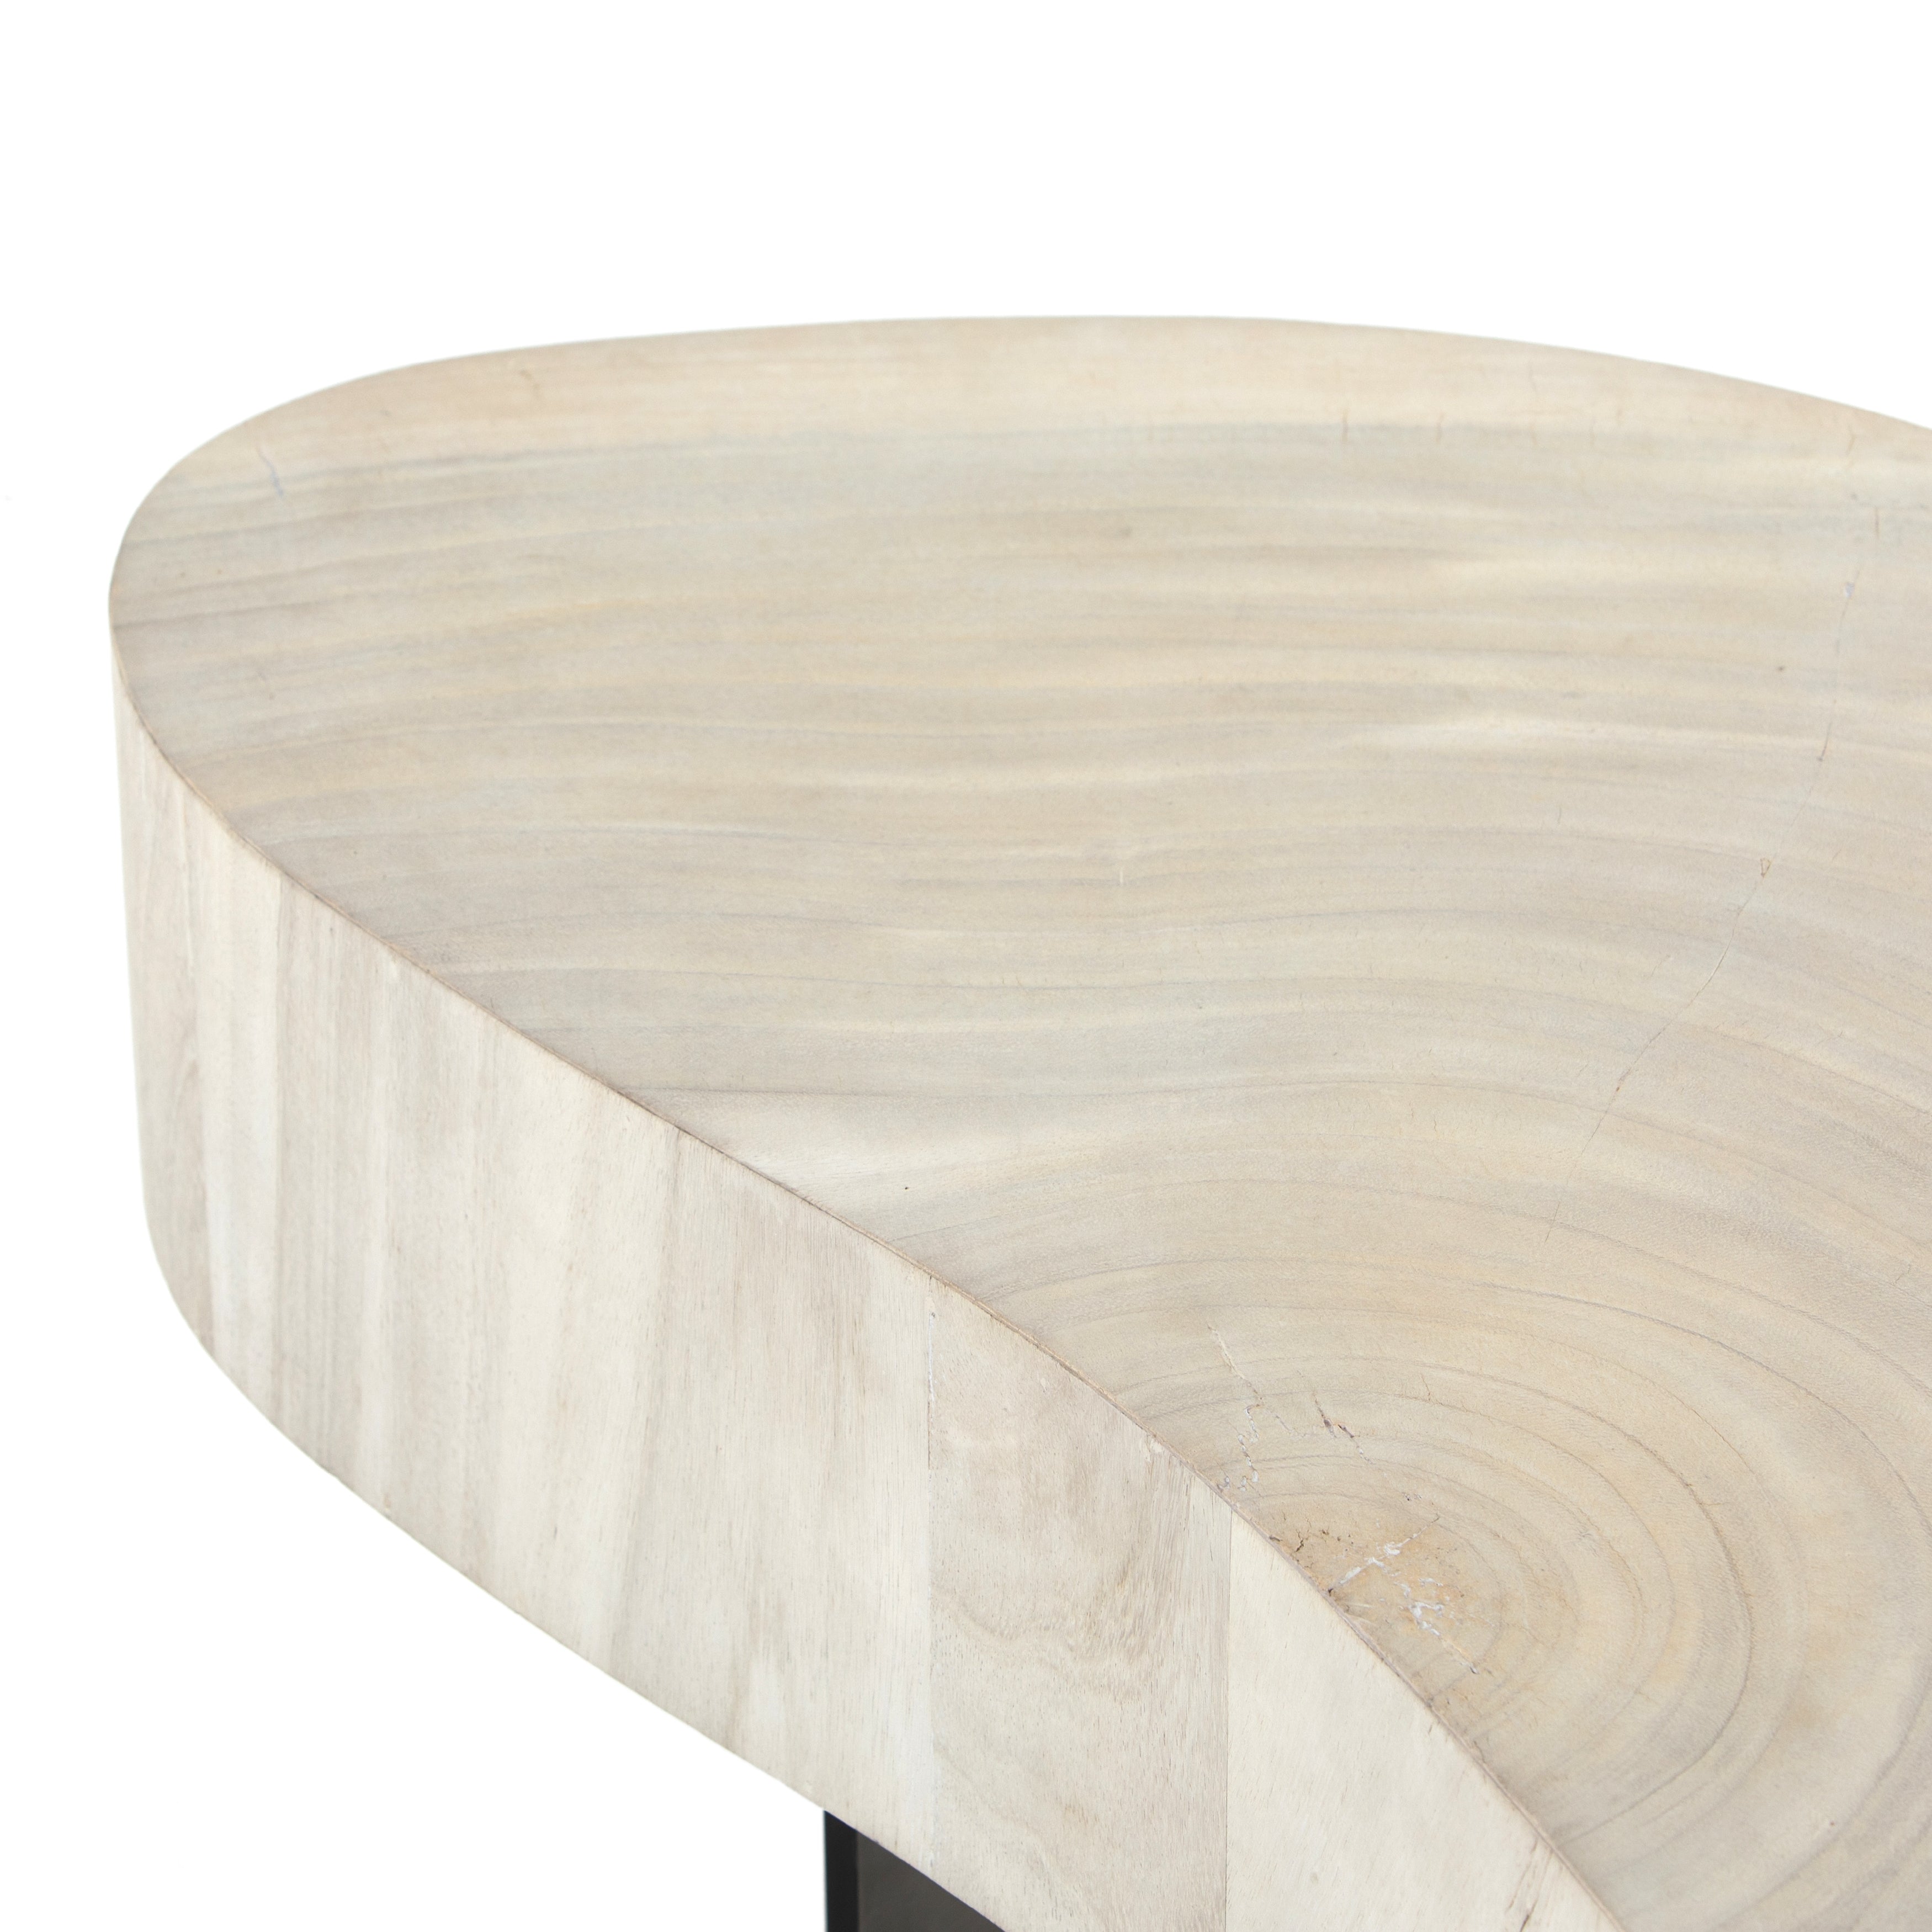 Natural beauty - total novelty. A thick slab of bleached, oyster-cut Guanacaste forms a tall, kidney-shaped coffee table. Visible rings speak to woods' natural graining, while a dark gunmetal-finished base provides clean contrast to the whole look. Amethyst Home provides interior design, new construction, custom furniture, and area rugs in the Winter Garden metro area.